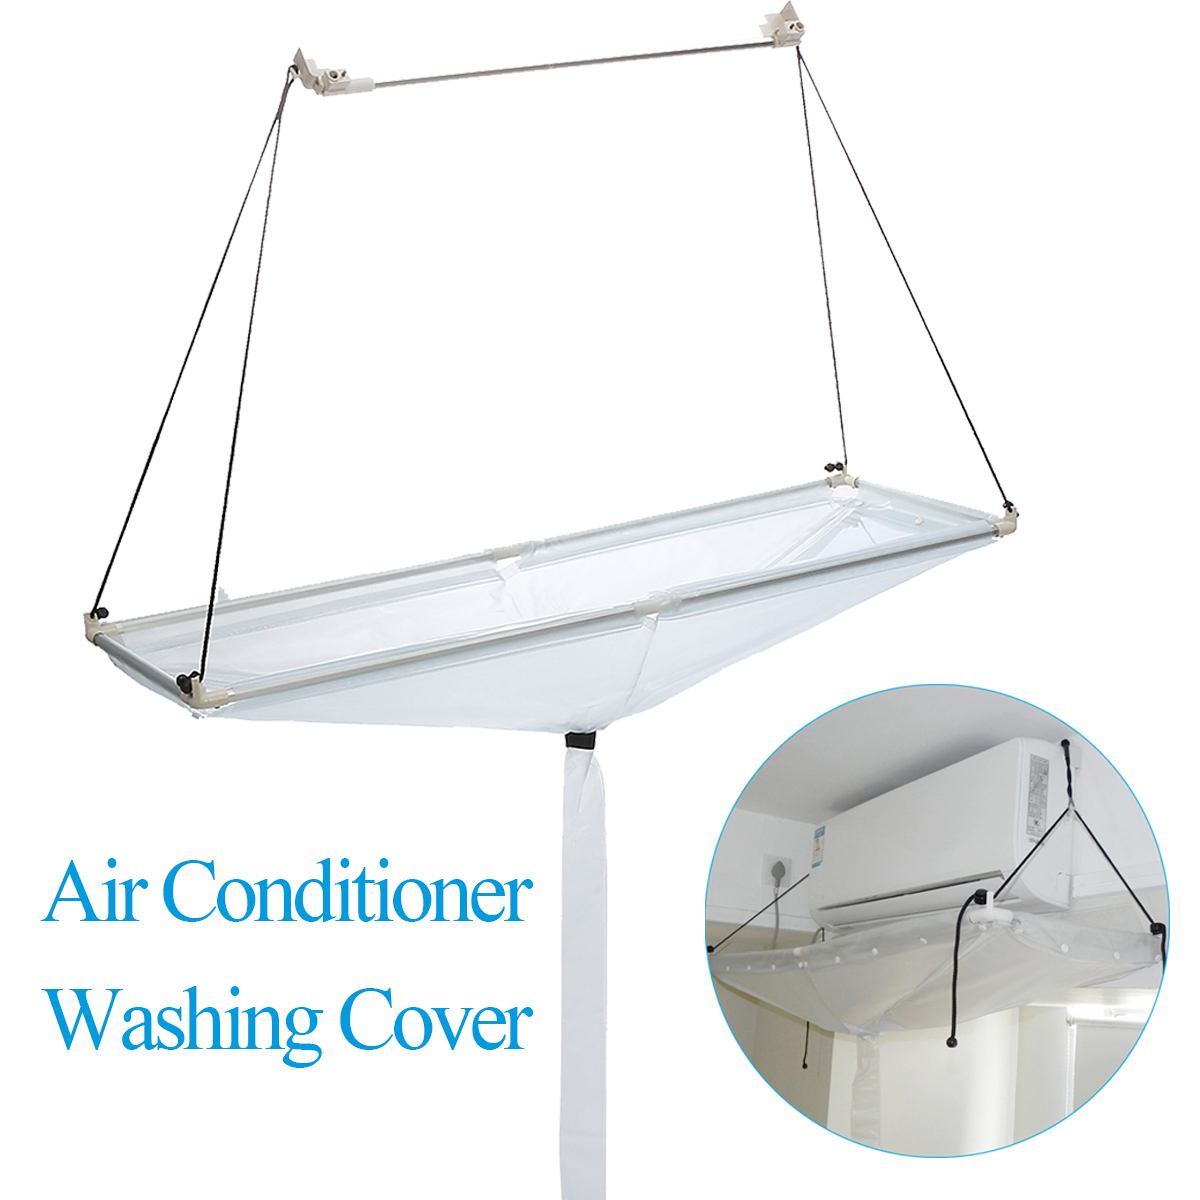 Open Type Air Conditioner Washing Covers Home Ceiling Wall Mounted PVC Air Conditioning Cleaner Washing Cover Dust Cleaning Tool